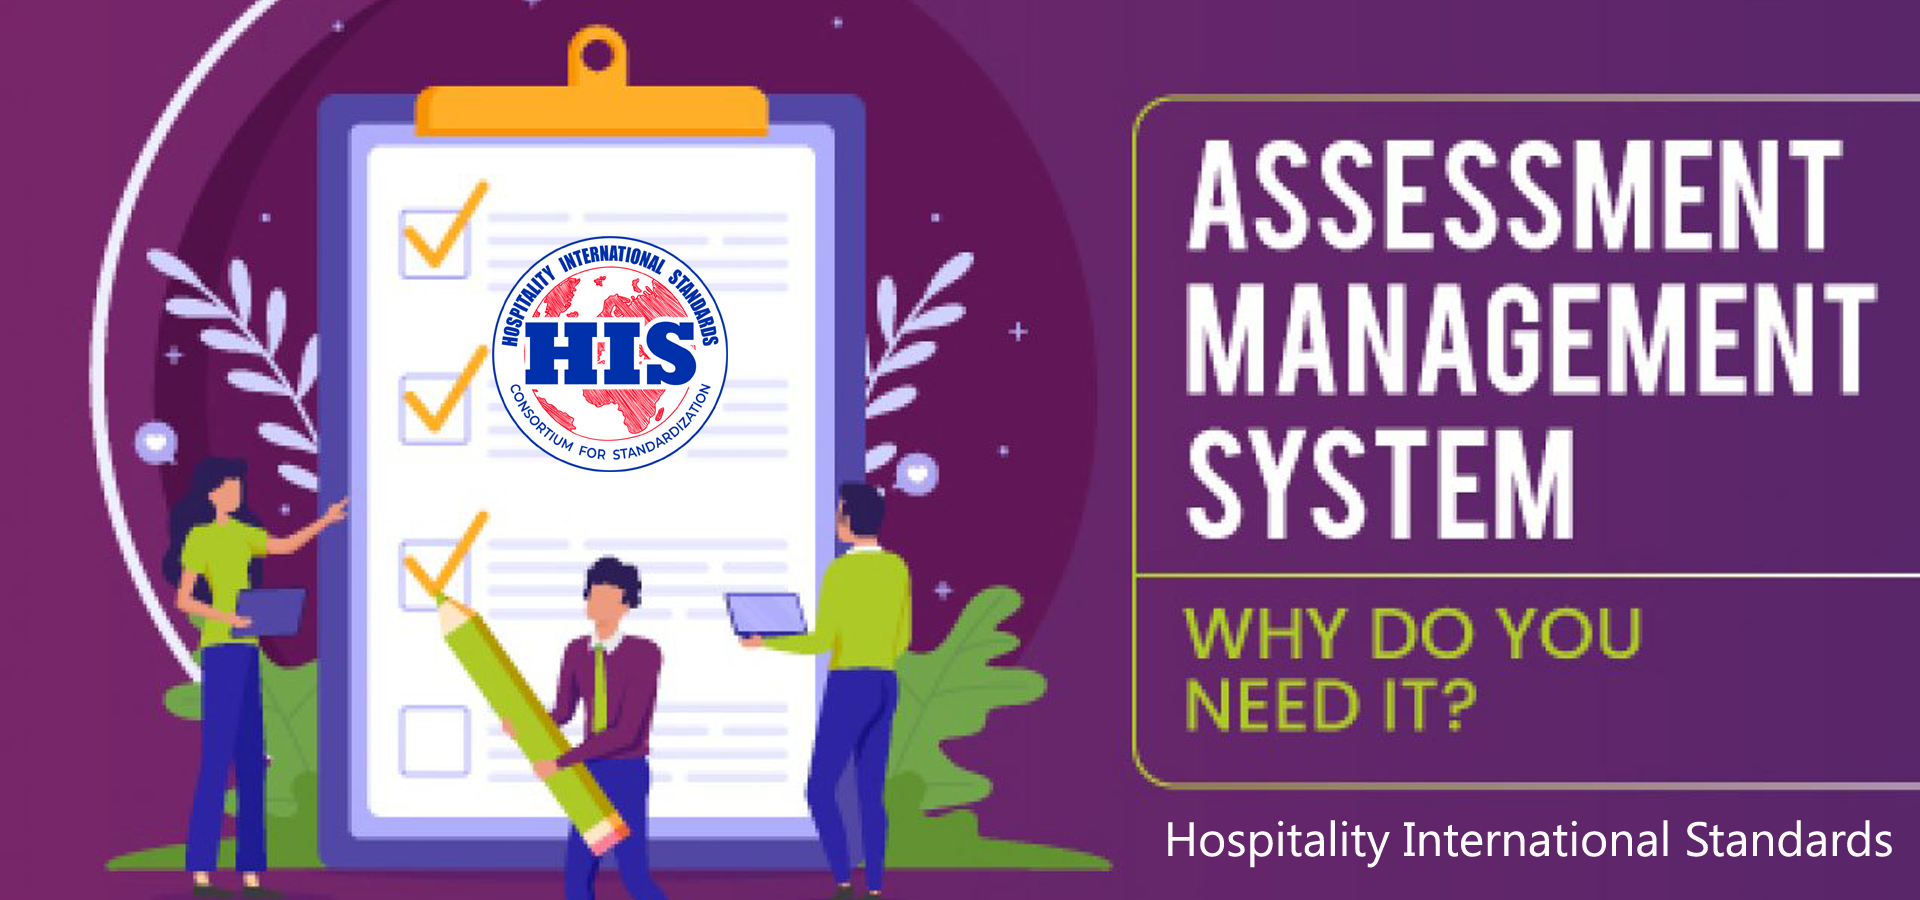 hospitality assessment process certification